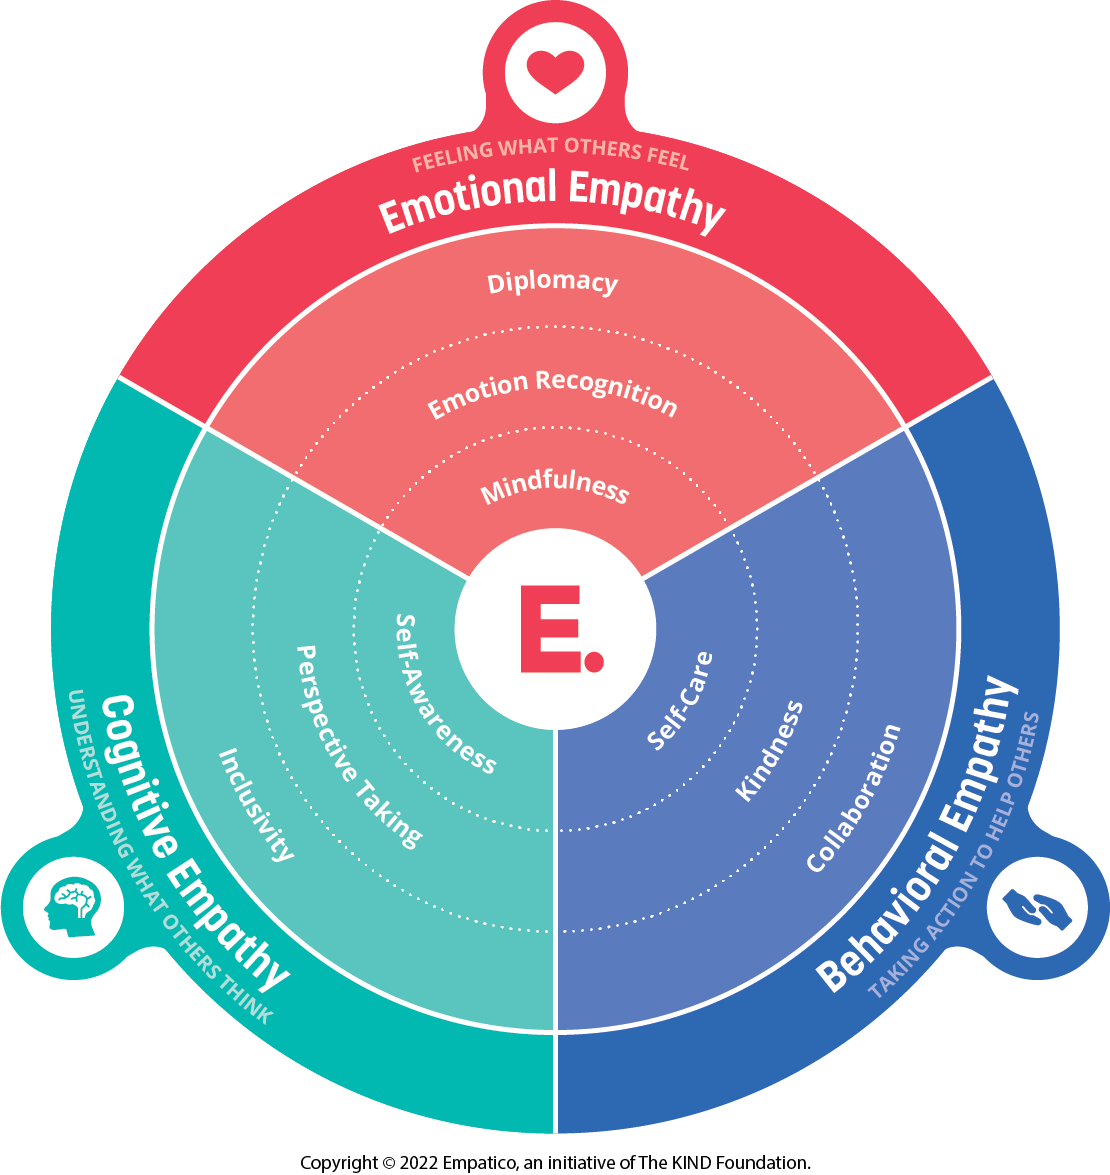 The Empathy Framework. Created by Empatico, the Empathy Framework is a tool that takes the current science one step further by recognizing there are also different levels of application. These include practicing empathy toward oneself, toward others, and towards the rest of the world.